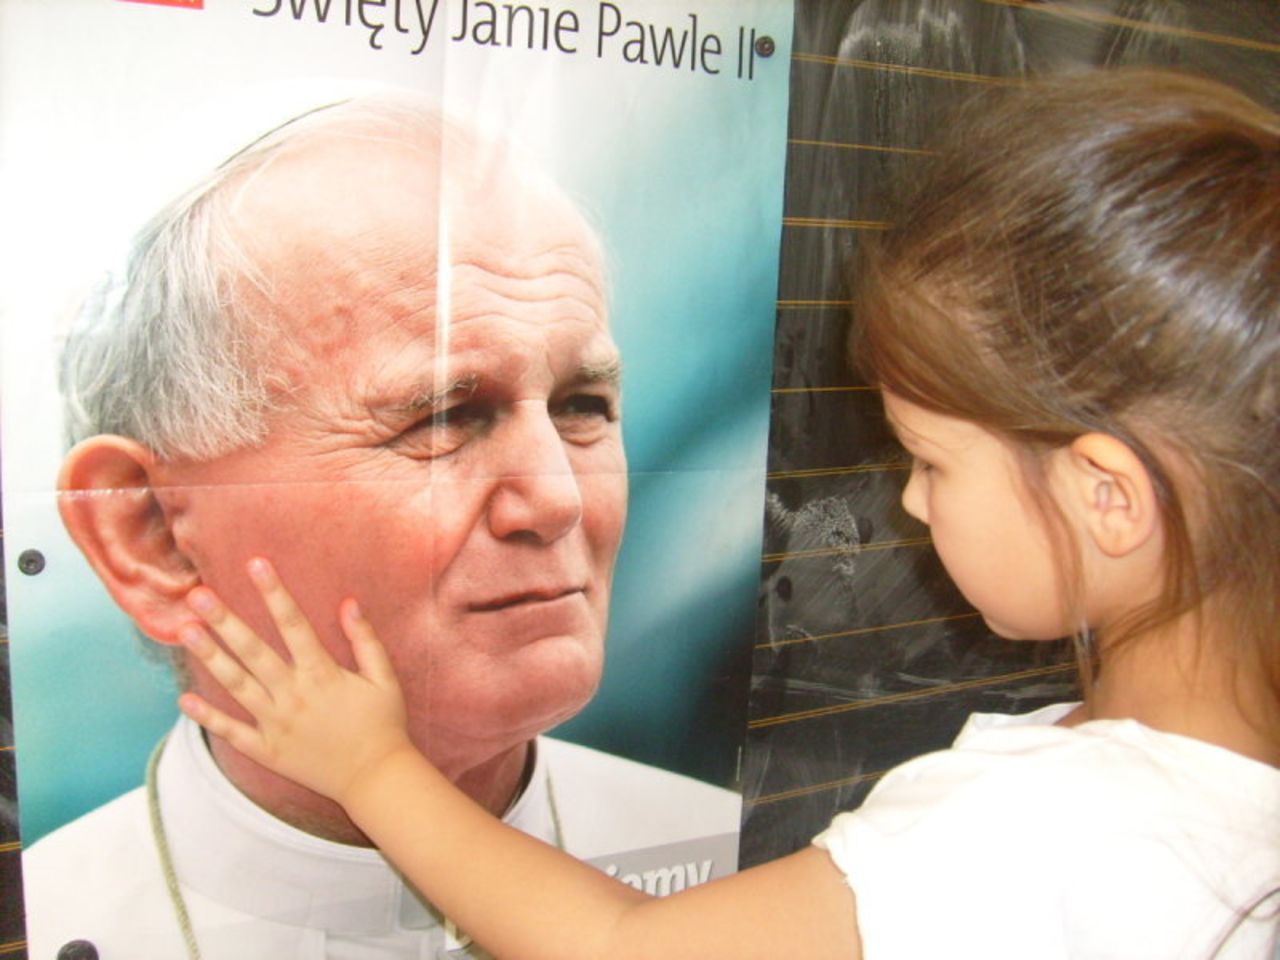 To celebrate Poland's 25 years of independence, readers shared their favorite things about the country. The most famous person in Poland is arguably <a href="http://ireport.cnn.com/docs/DOC-1140033">Pope John Paul II</a>. From posters to personal shrines, Poles find ways to remember the first Polish pope.